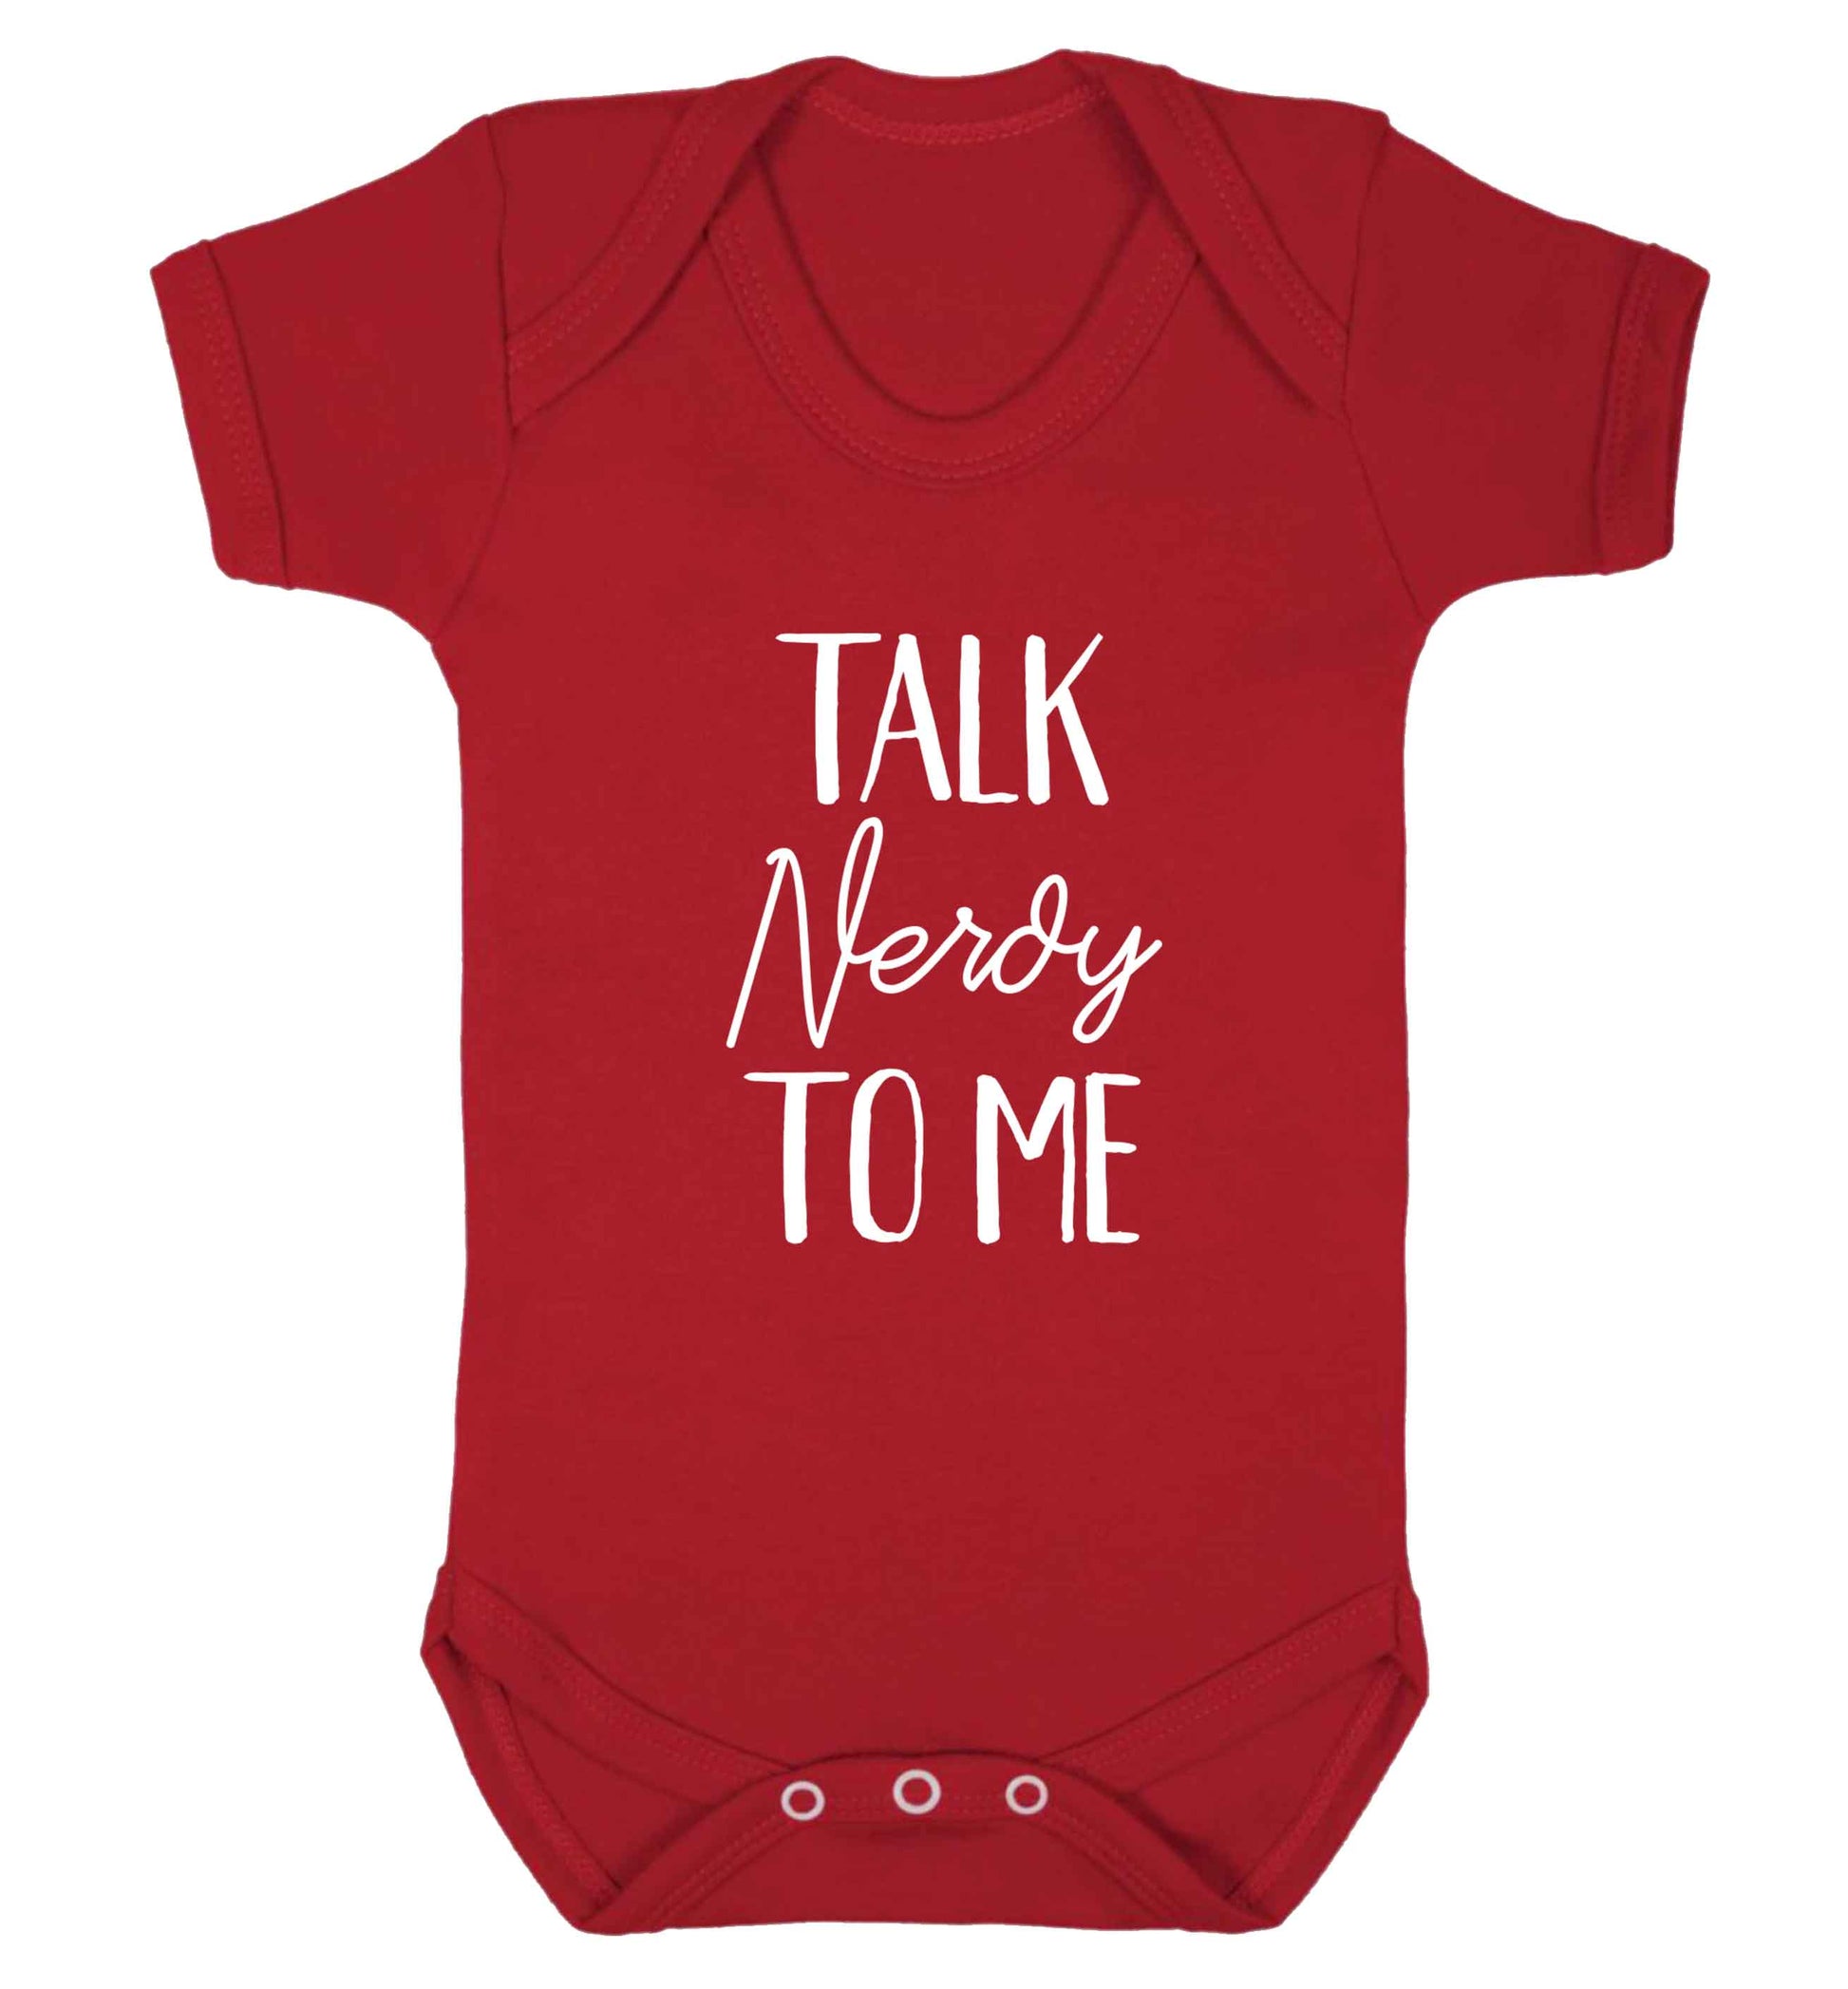 Talk nerdy to me baby vest red 18-24 months